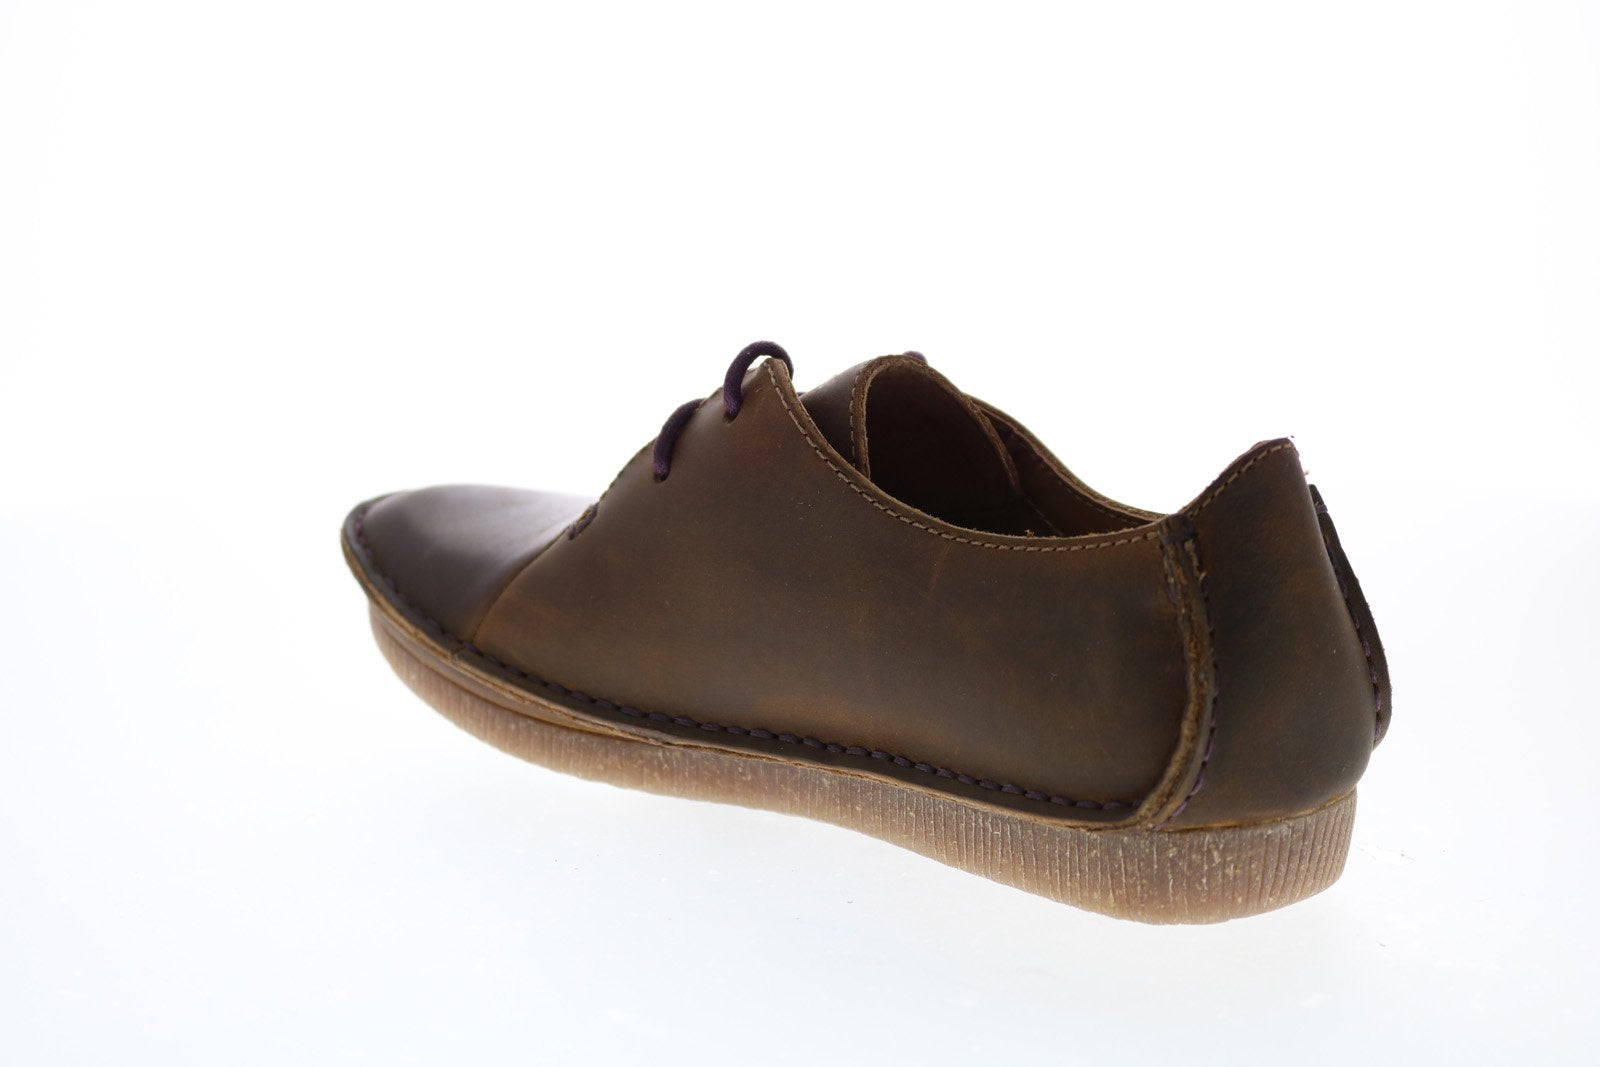 Clarks Janey Mae 26112617 Womens Brown Leather Oxford Flats Shoes ...